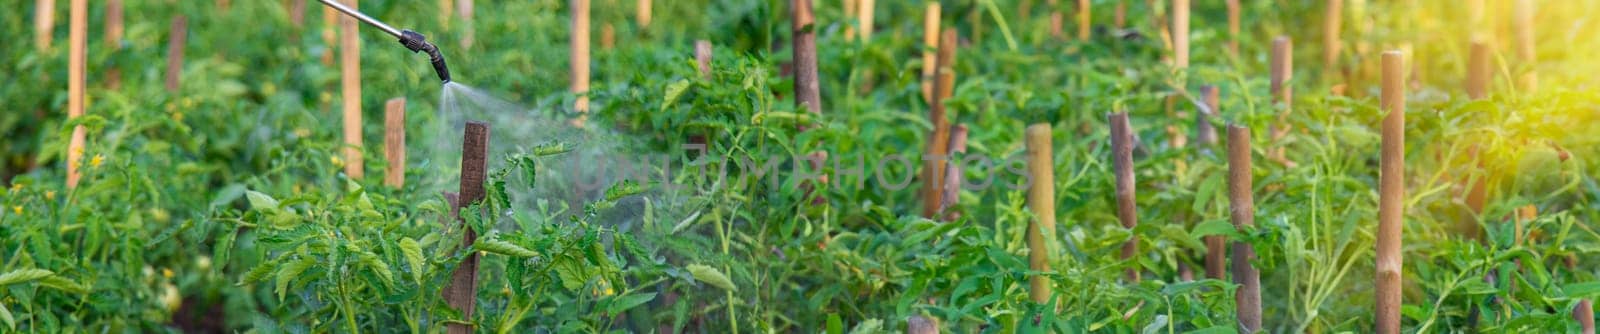 Spraying tomatoes in the garden. Selective focus. by yanadjana